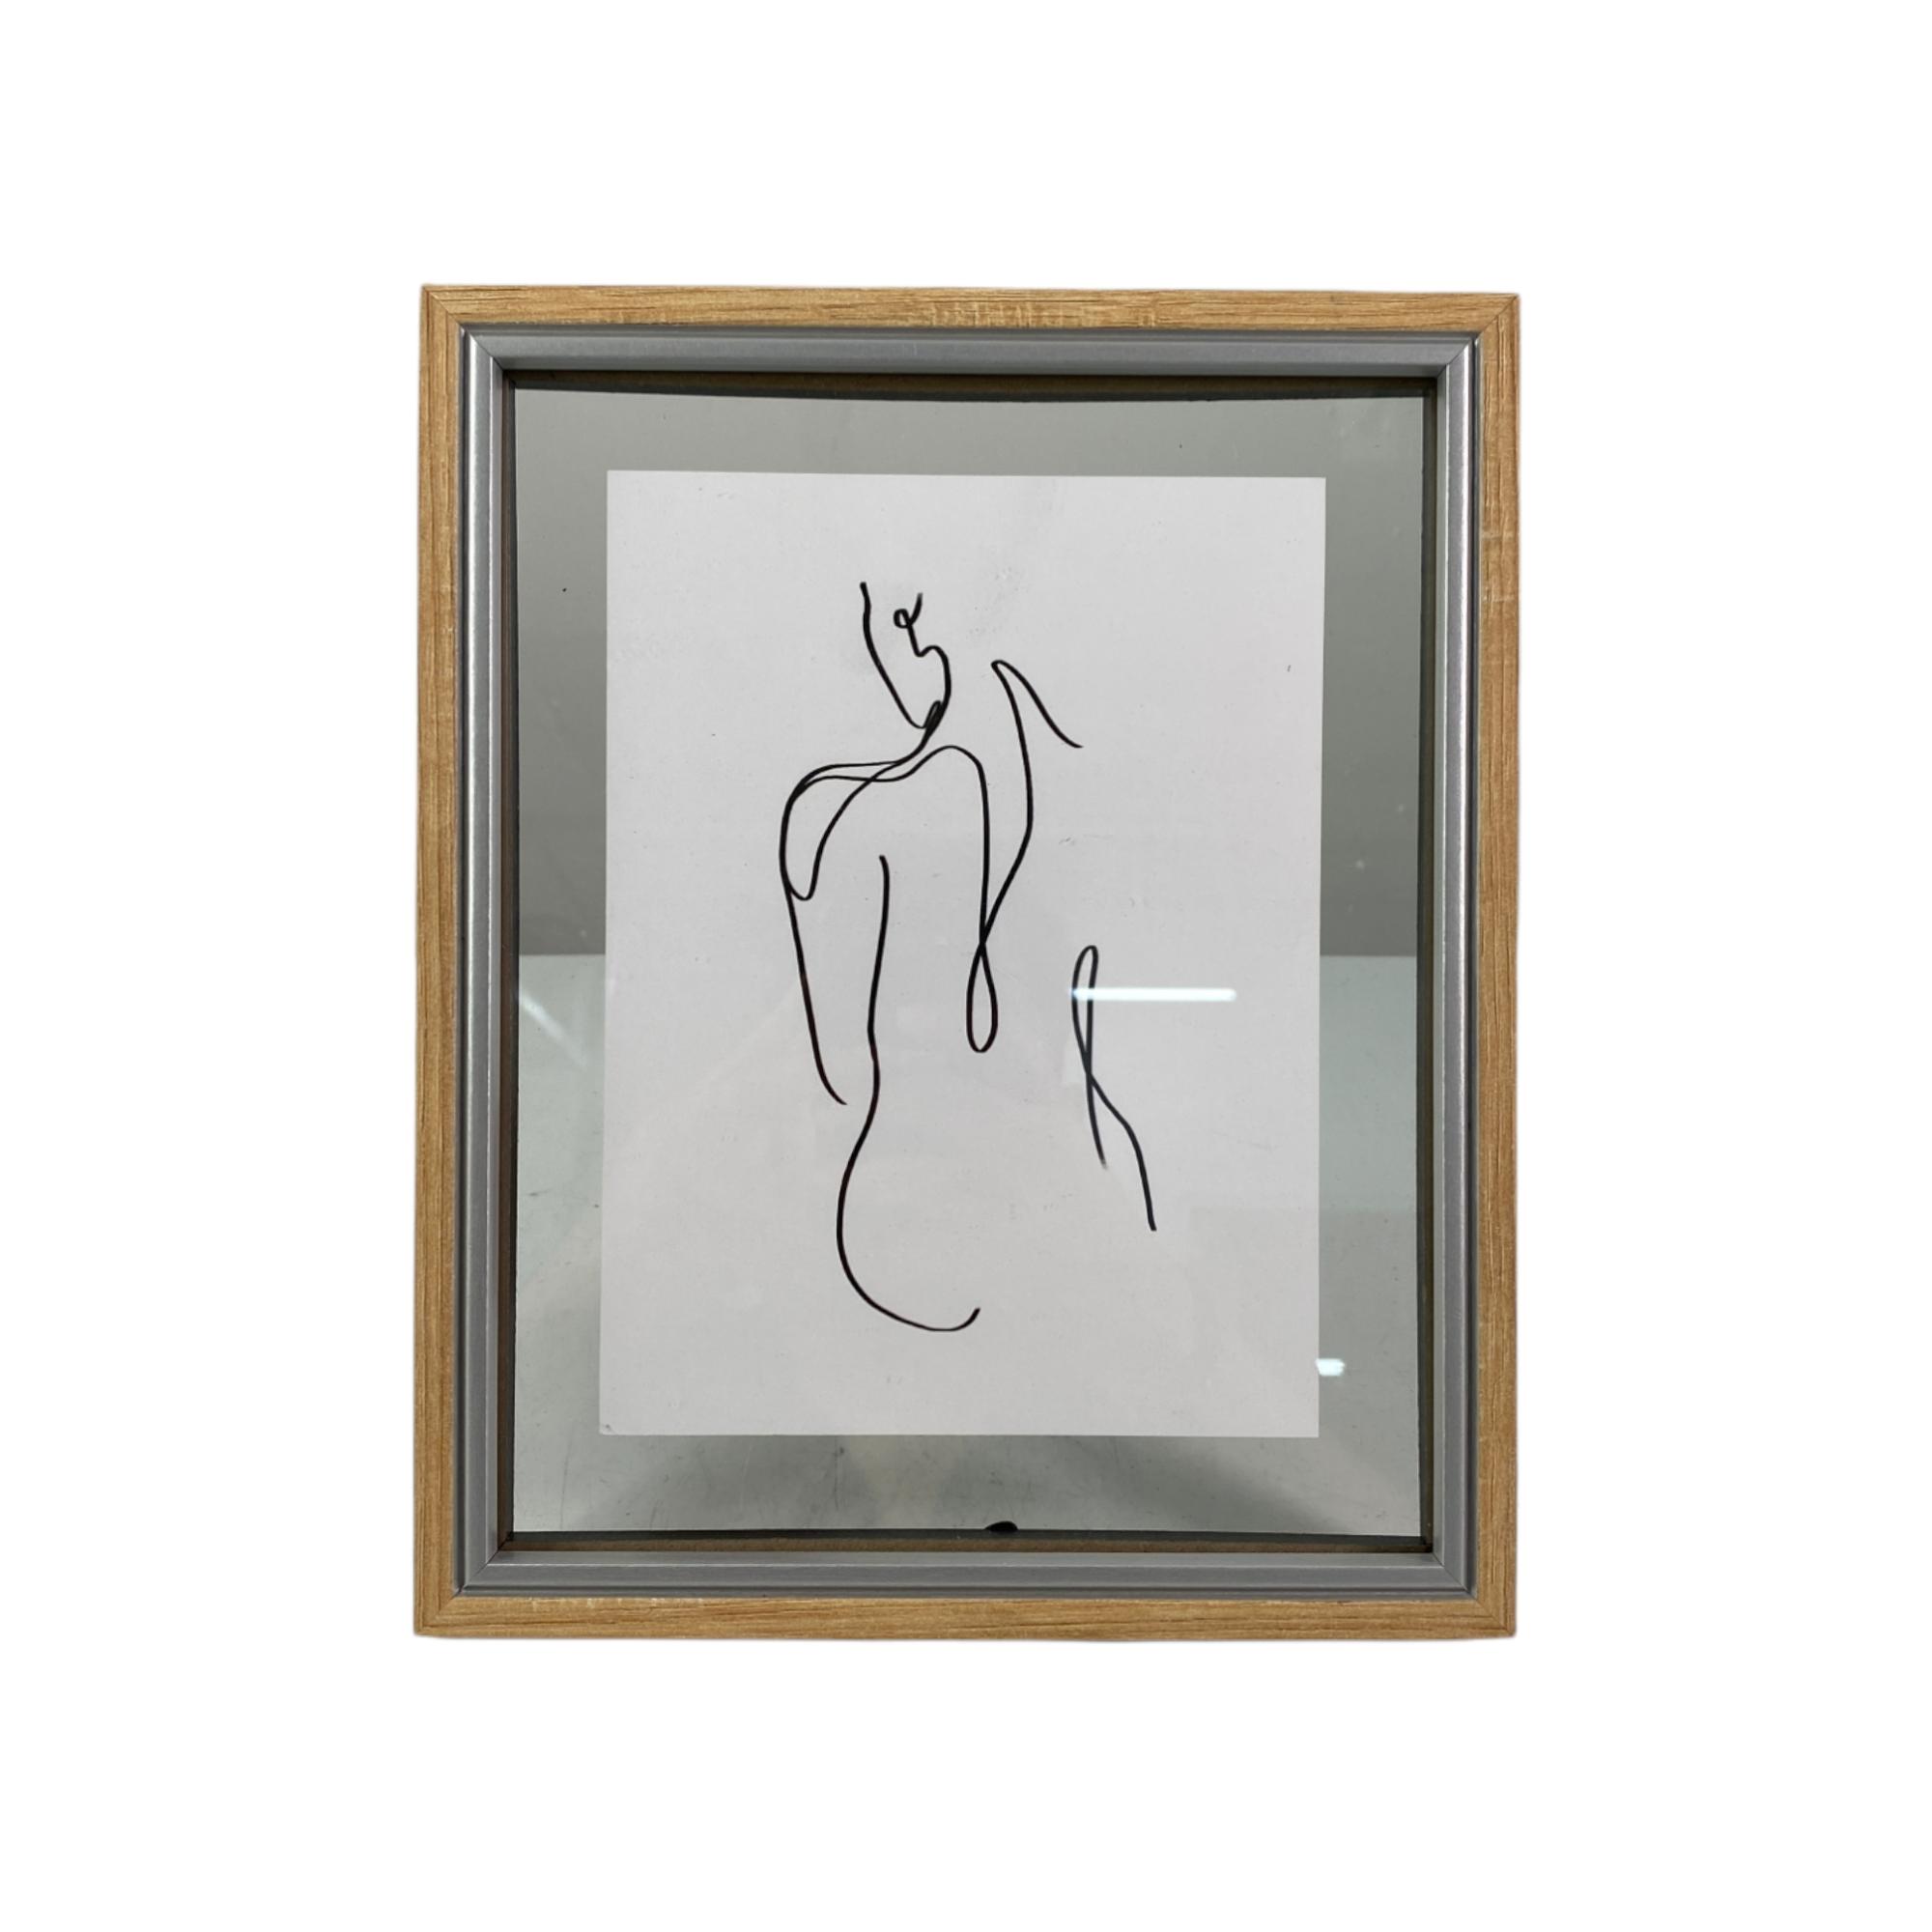 PICTURE FRAME 8X10 27.4X27.7X2 - 530-282044